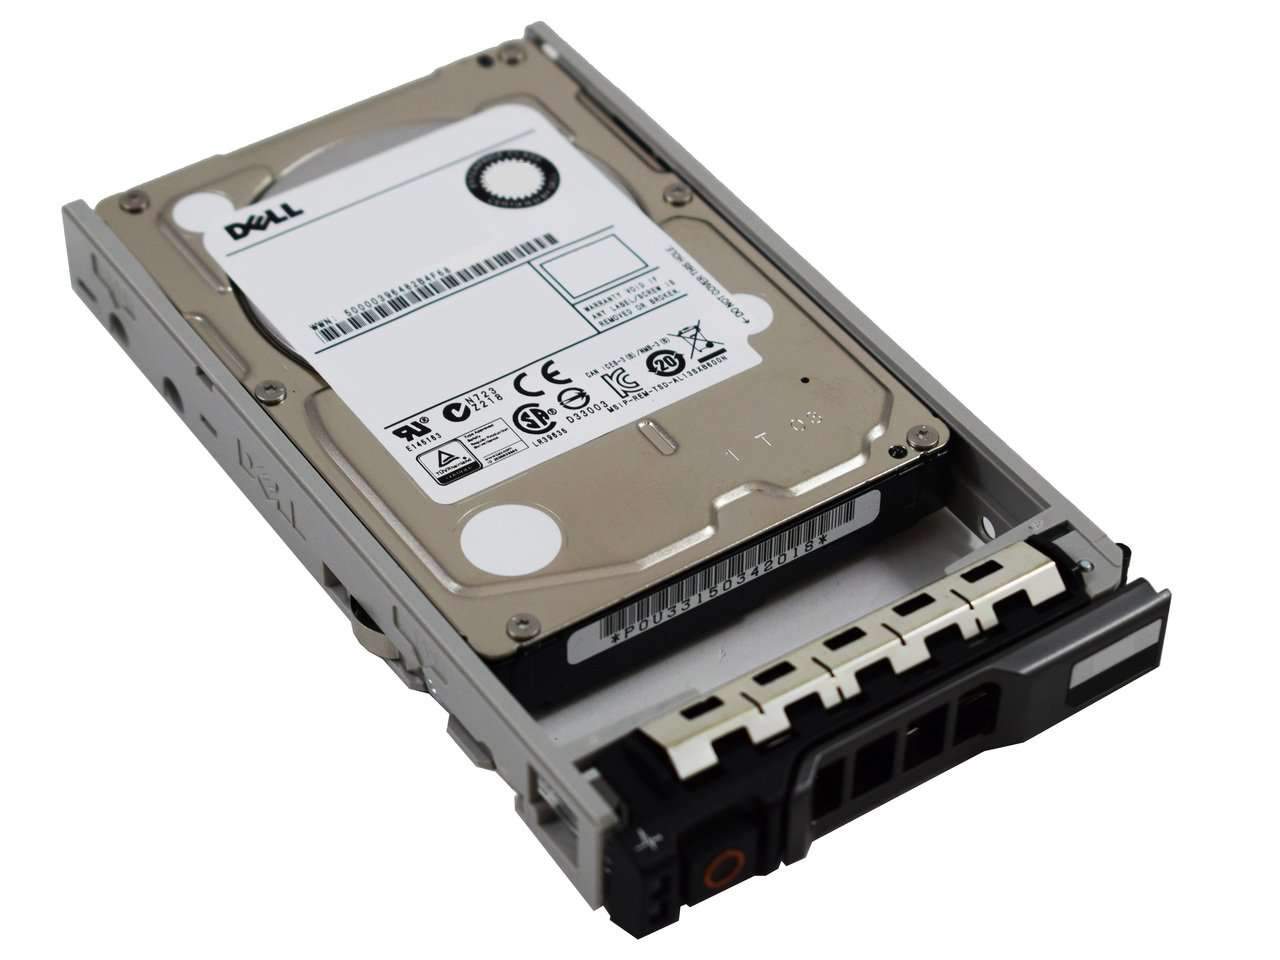 Dell G13 07FJW4 300GB 15K RPM SAS 12Gb/s 512n 2.5" Manufacturer Recertified HDD